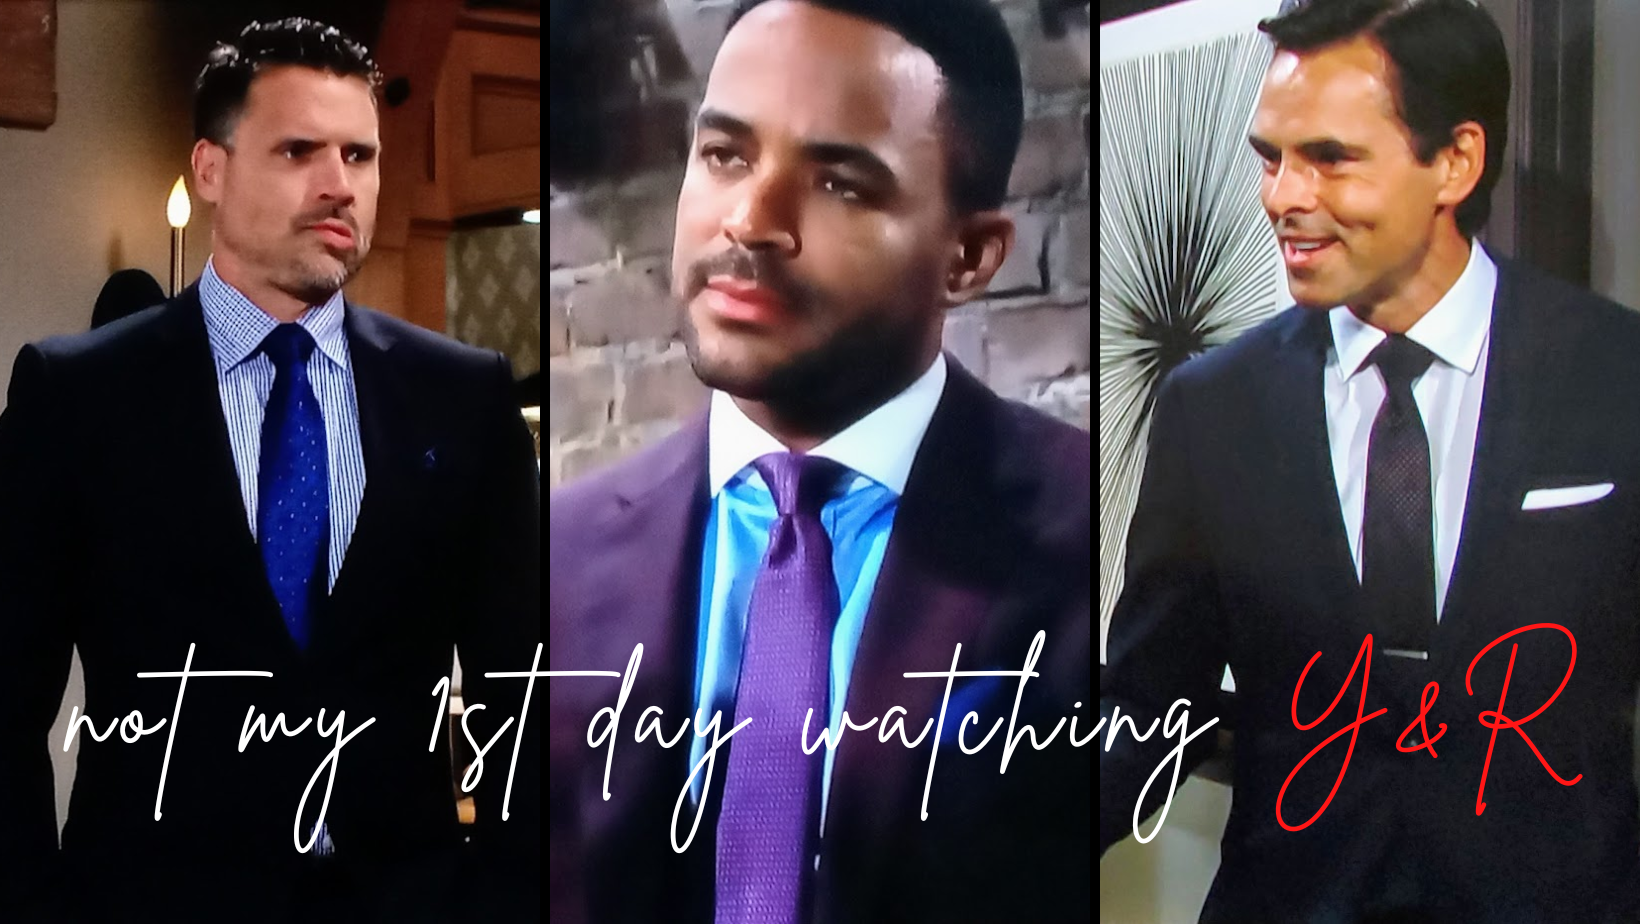 Y&R’s Men in Suits That Need To Stop, C-Suite Exits